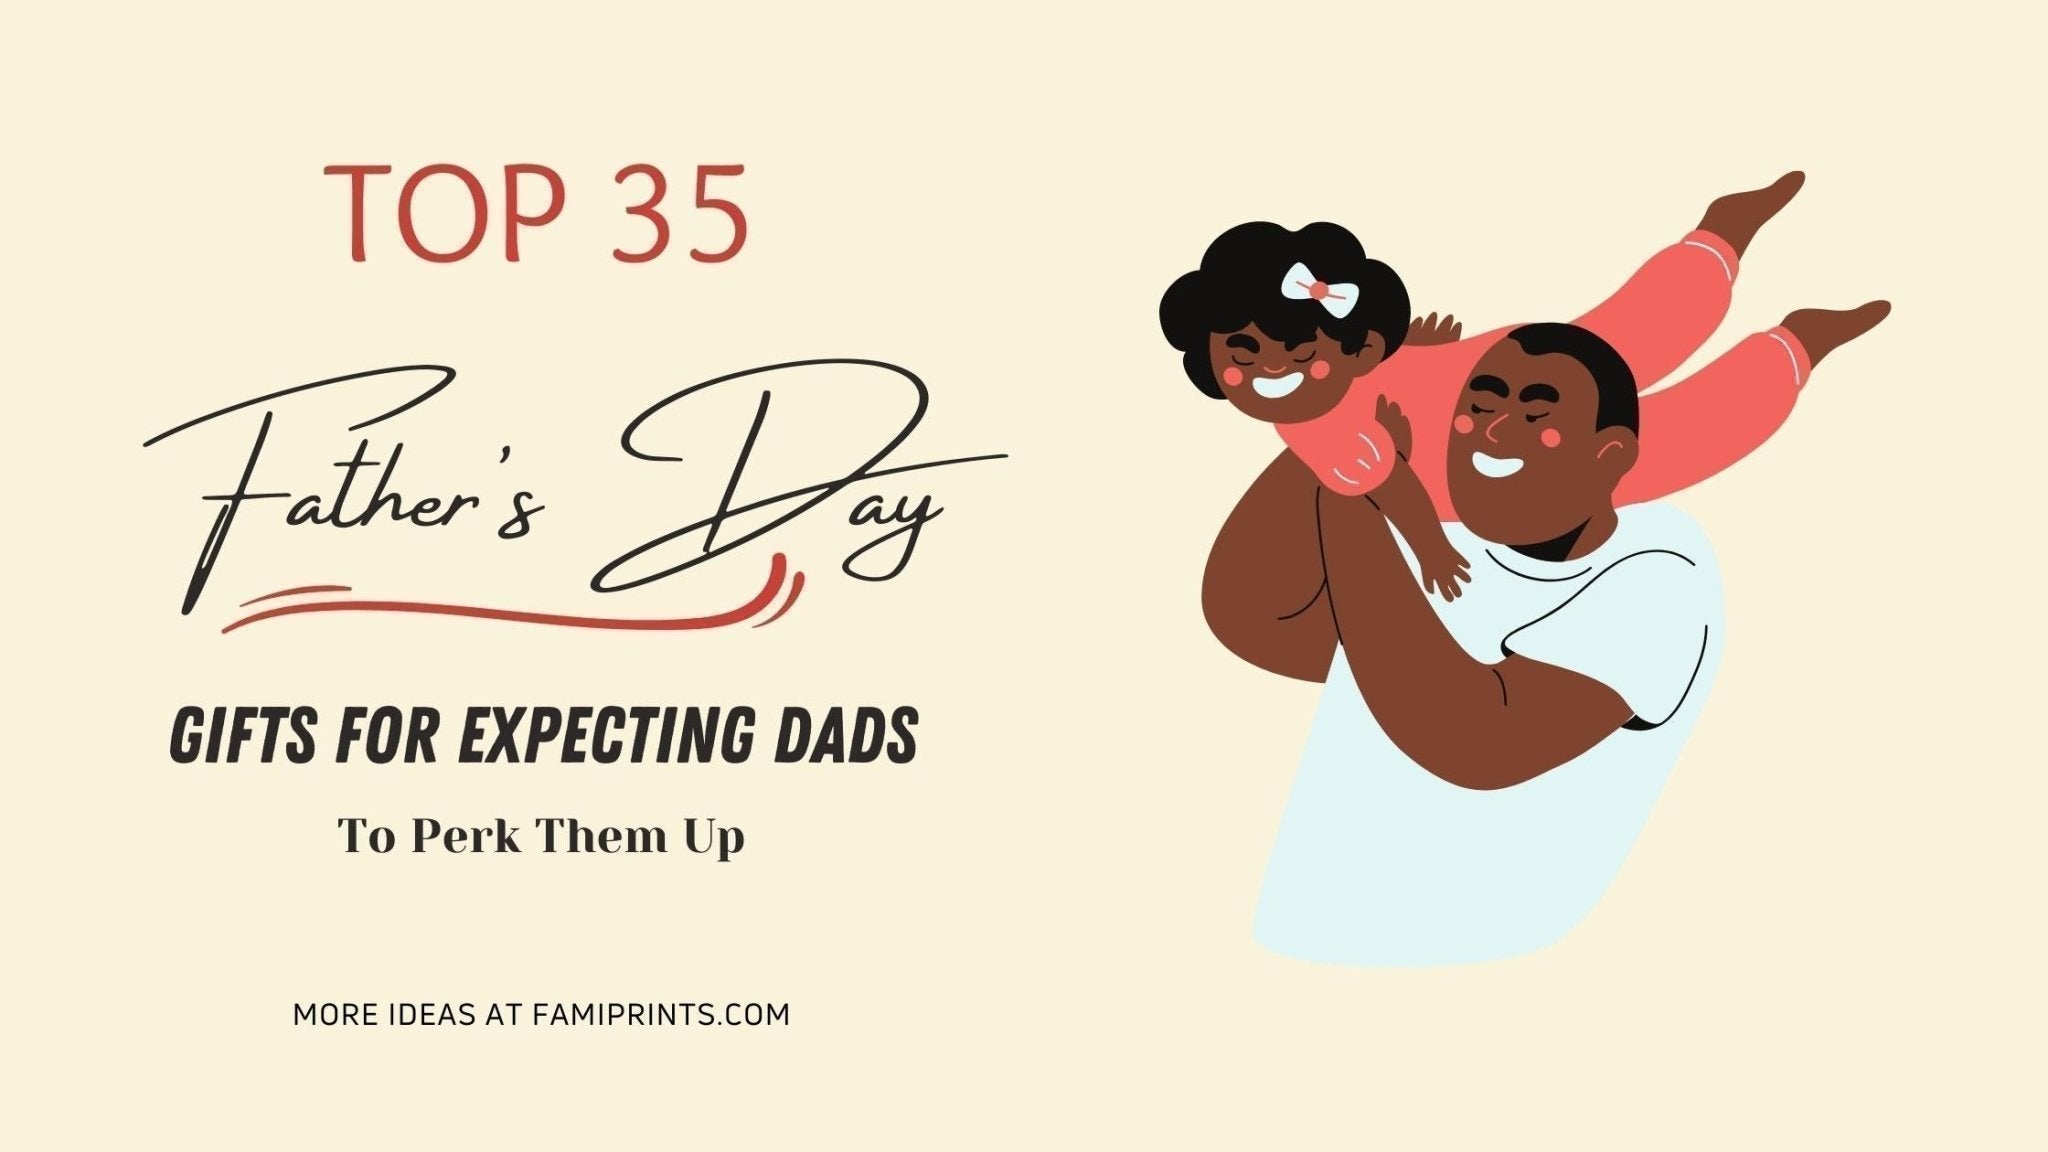 Top 35 Fathers Day Gifts For Expecting Dads To Perk Them Up - FamiPrints | Trending Customizable Family Gifts